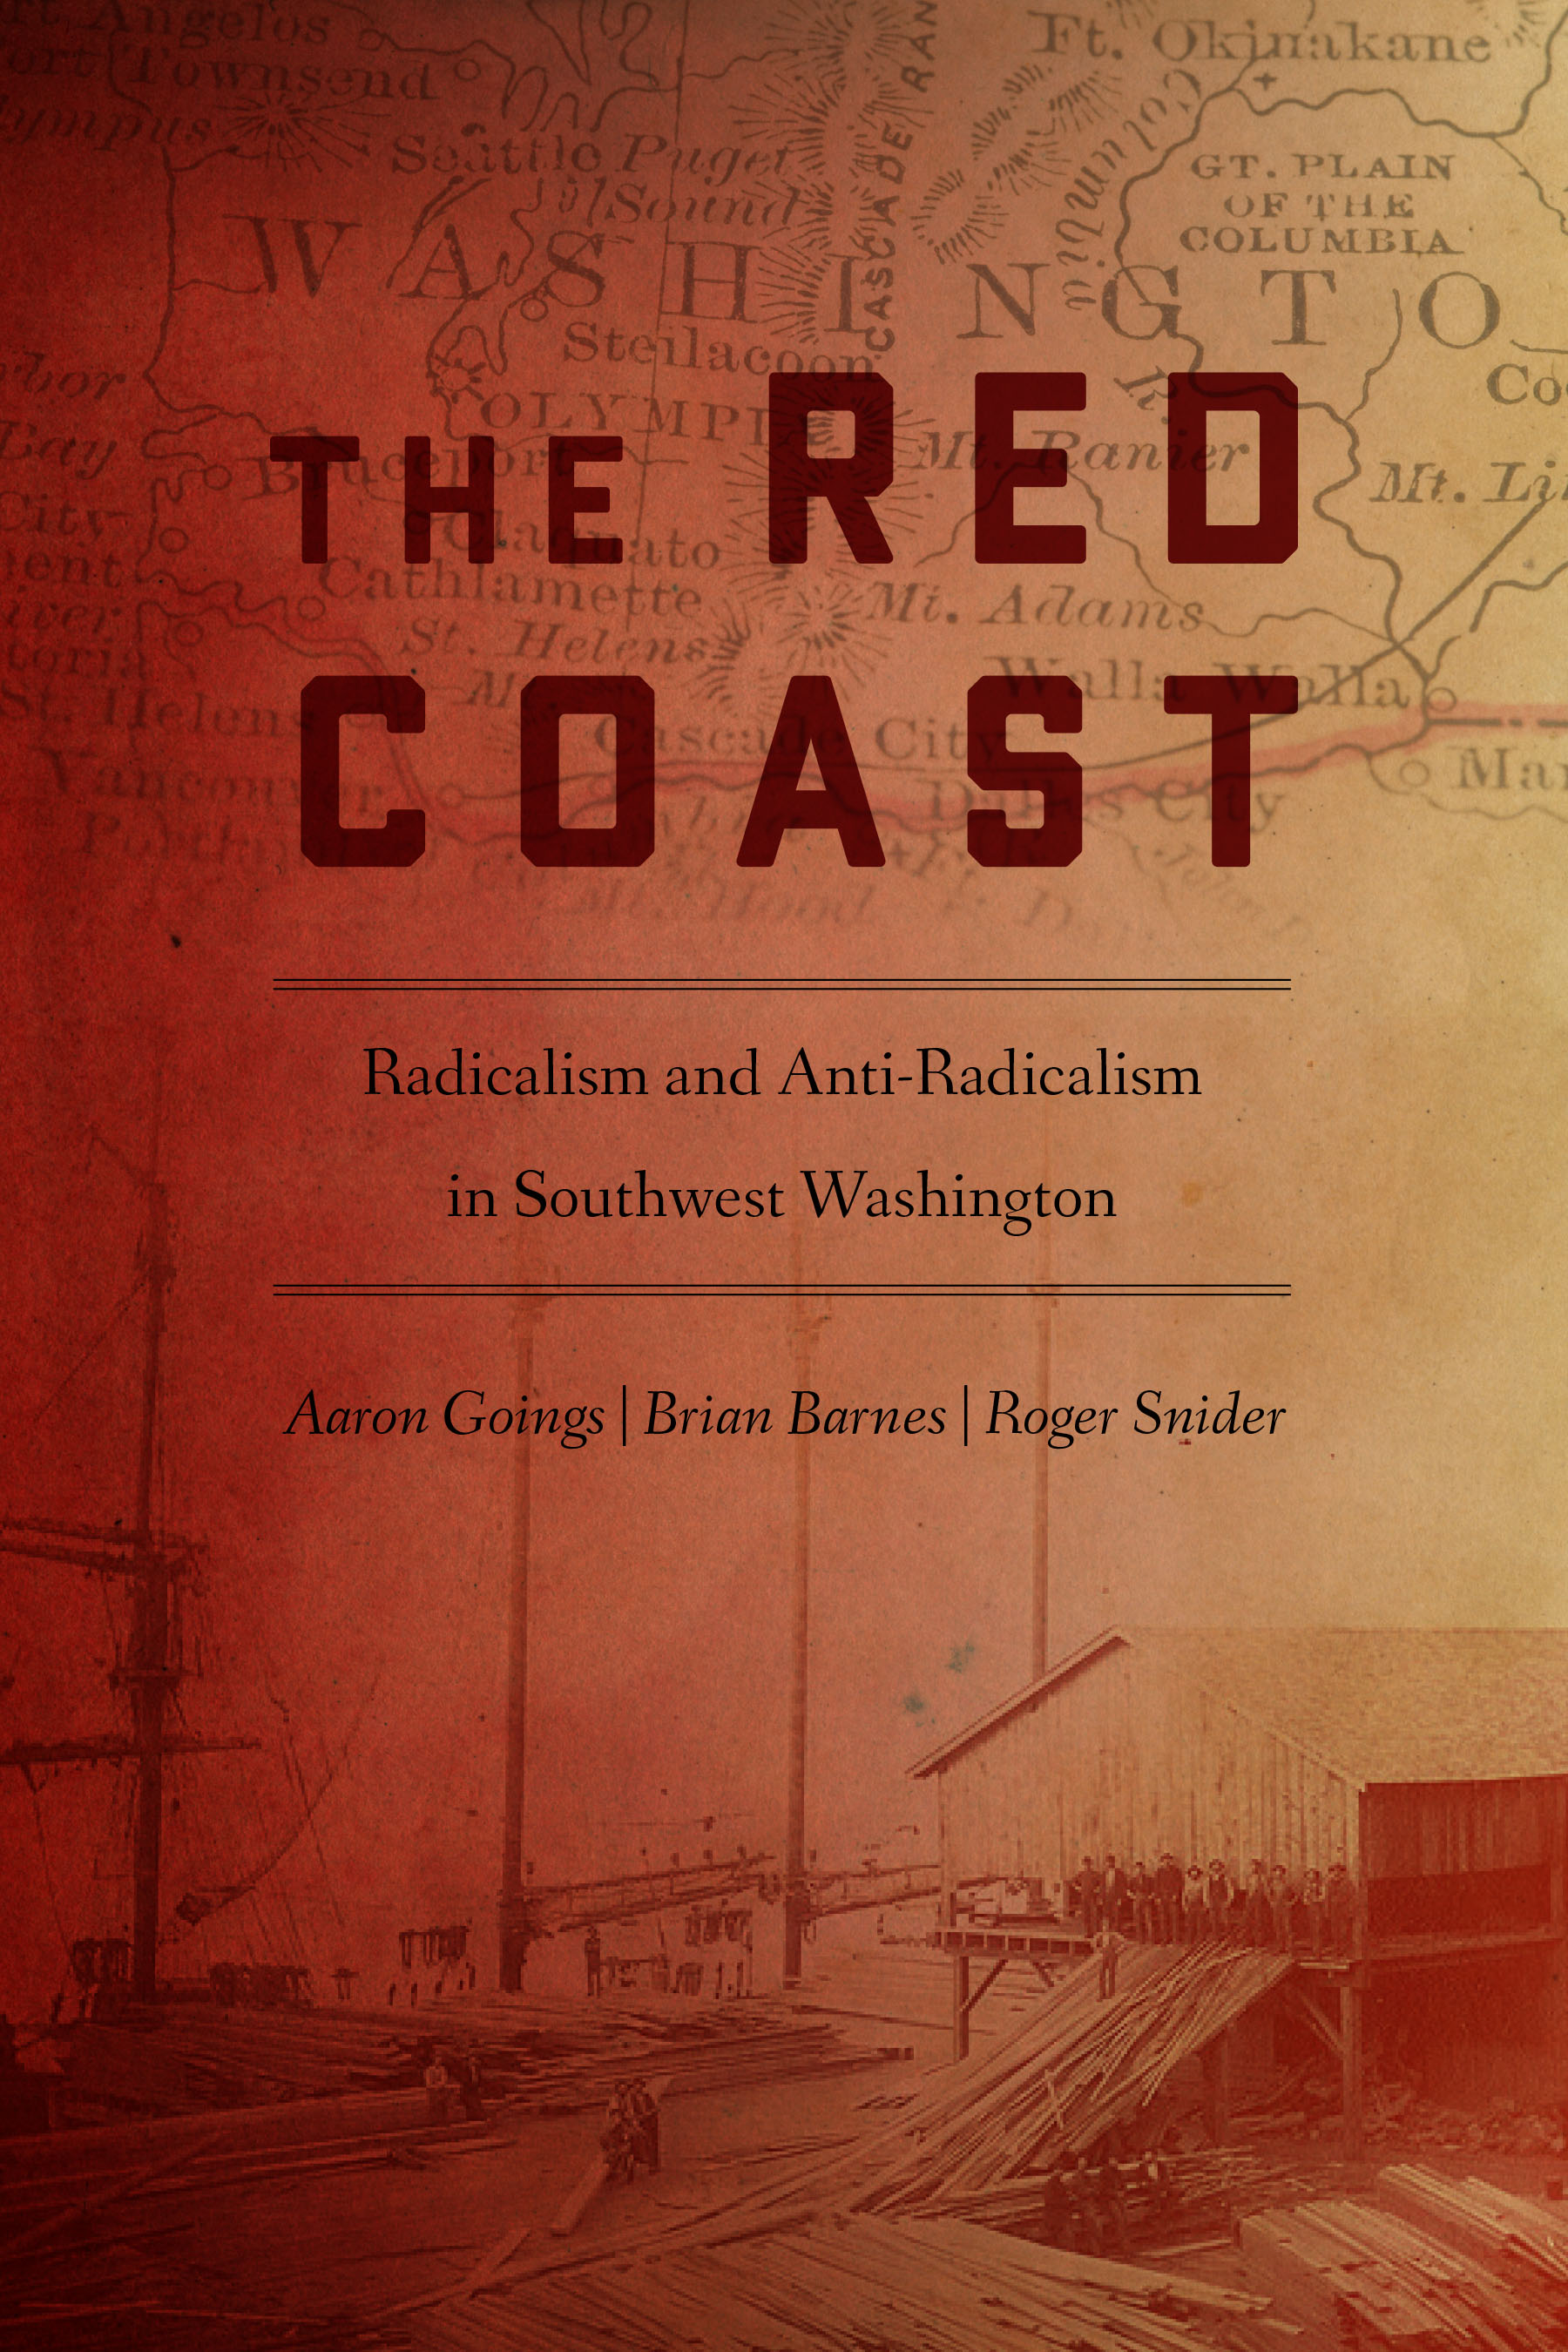 Red Coast Cover